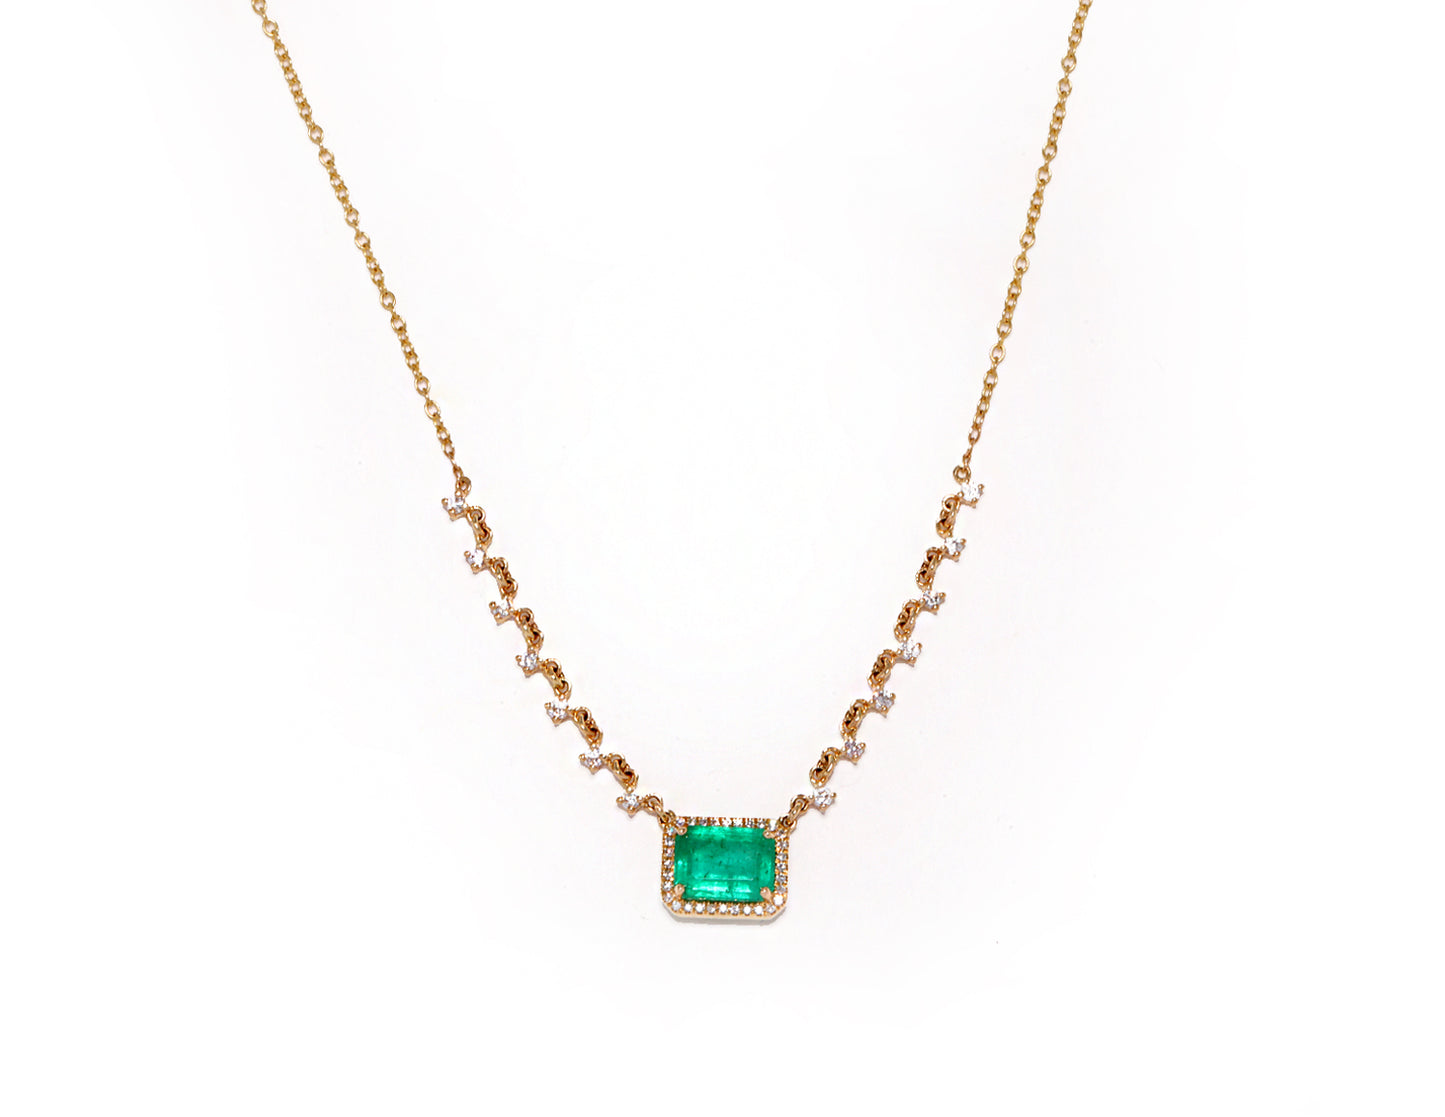 14K Rose Gold Diamond and Emerald Necklace